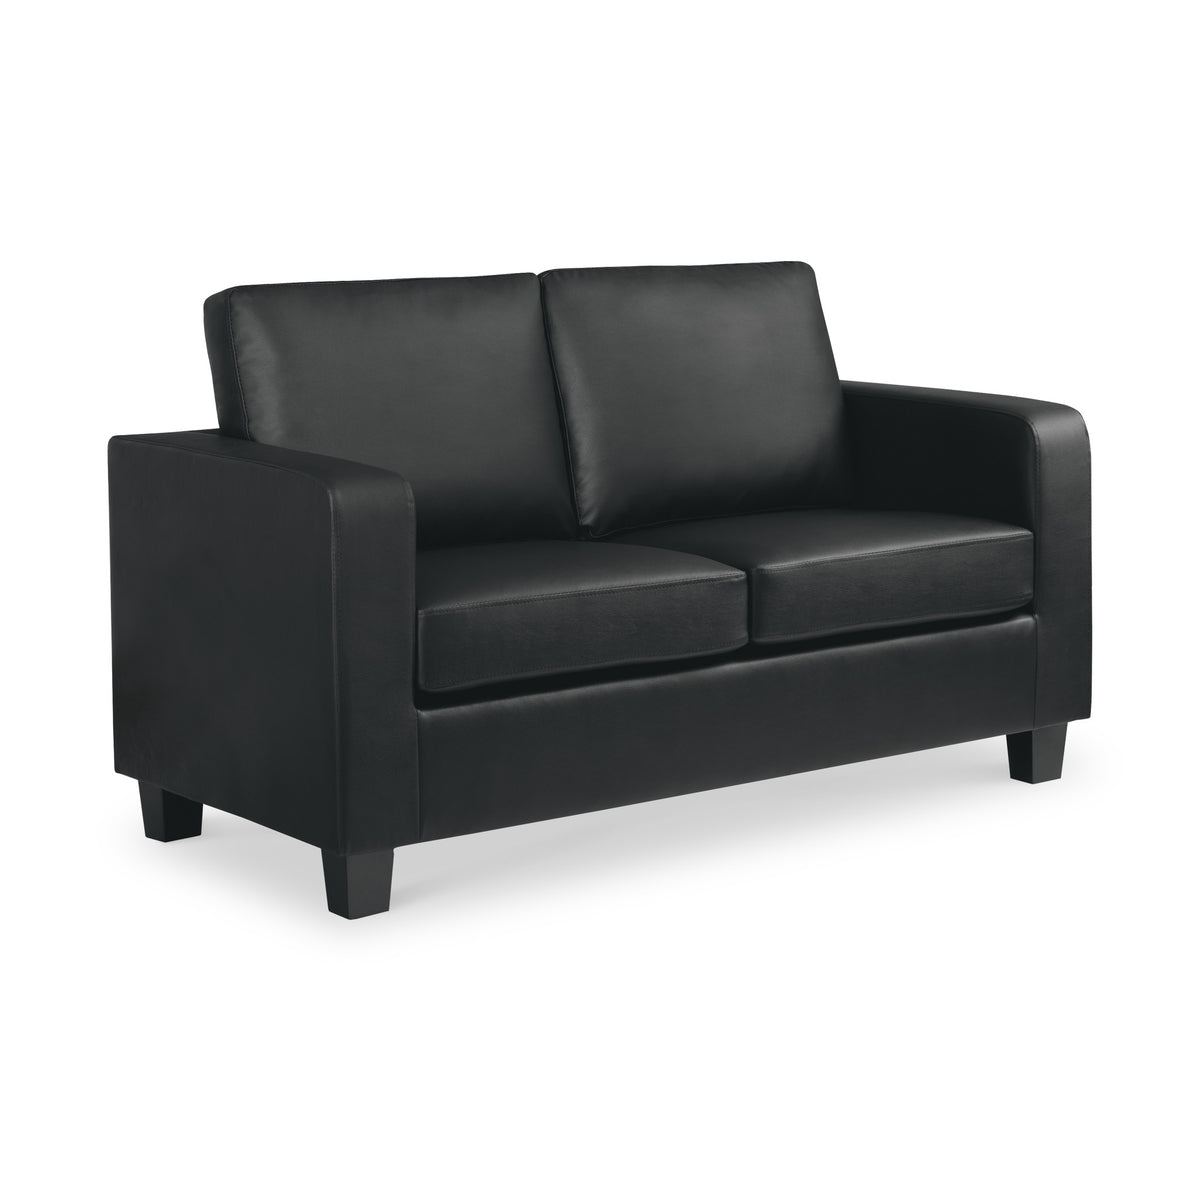 Cullen Faux Leather 2 Seater Sofa